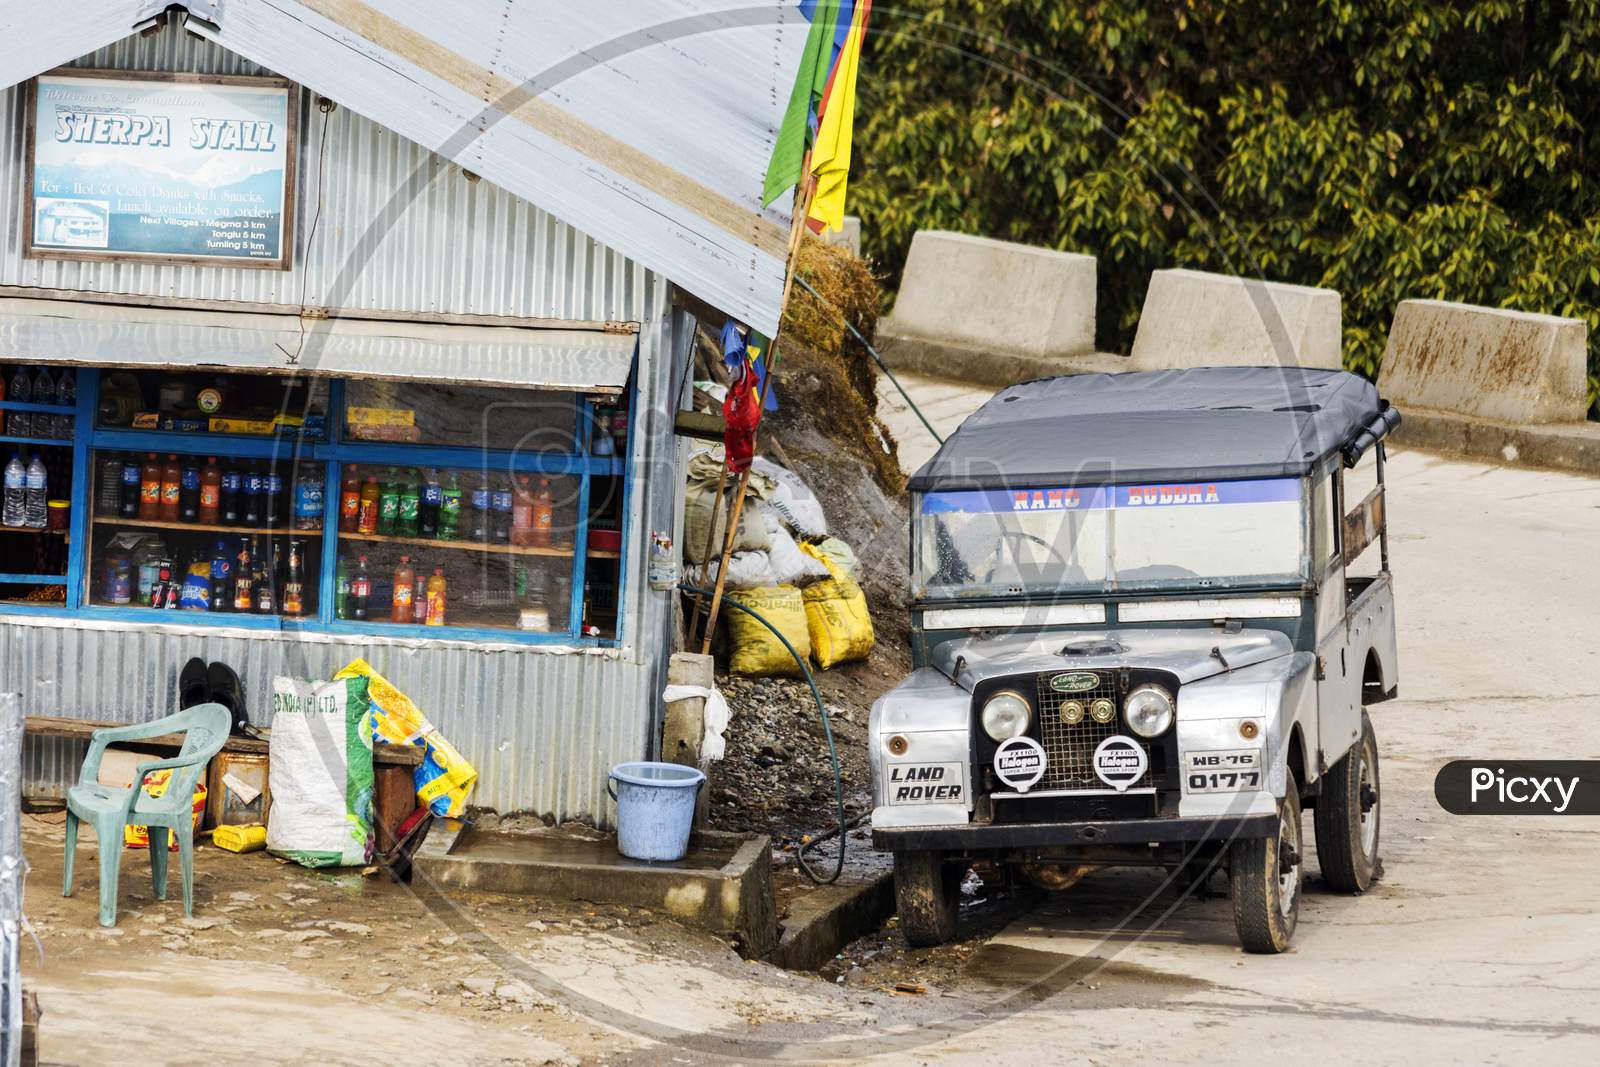 A Old Land Rover Car Parked Beside A Road Side Food Stall At Megma, West Bengal, India.